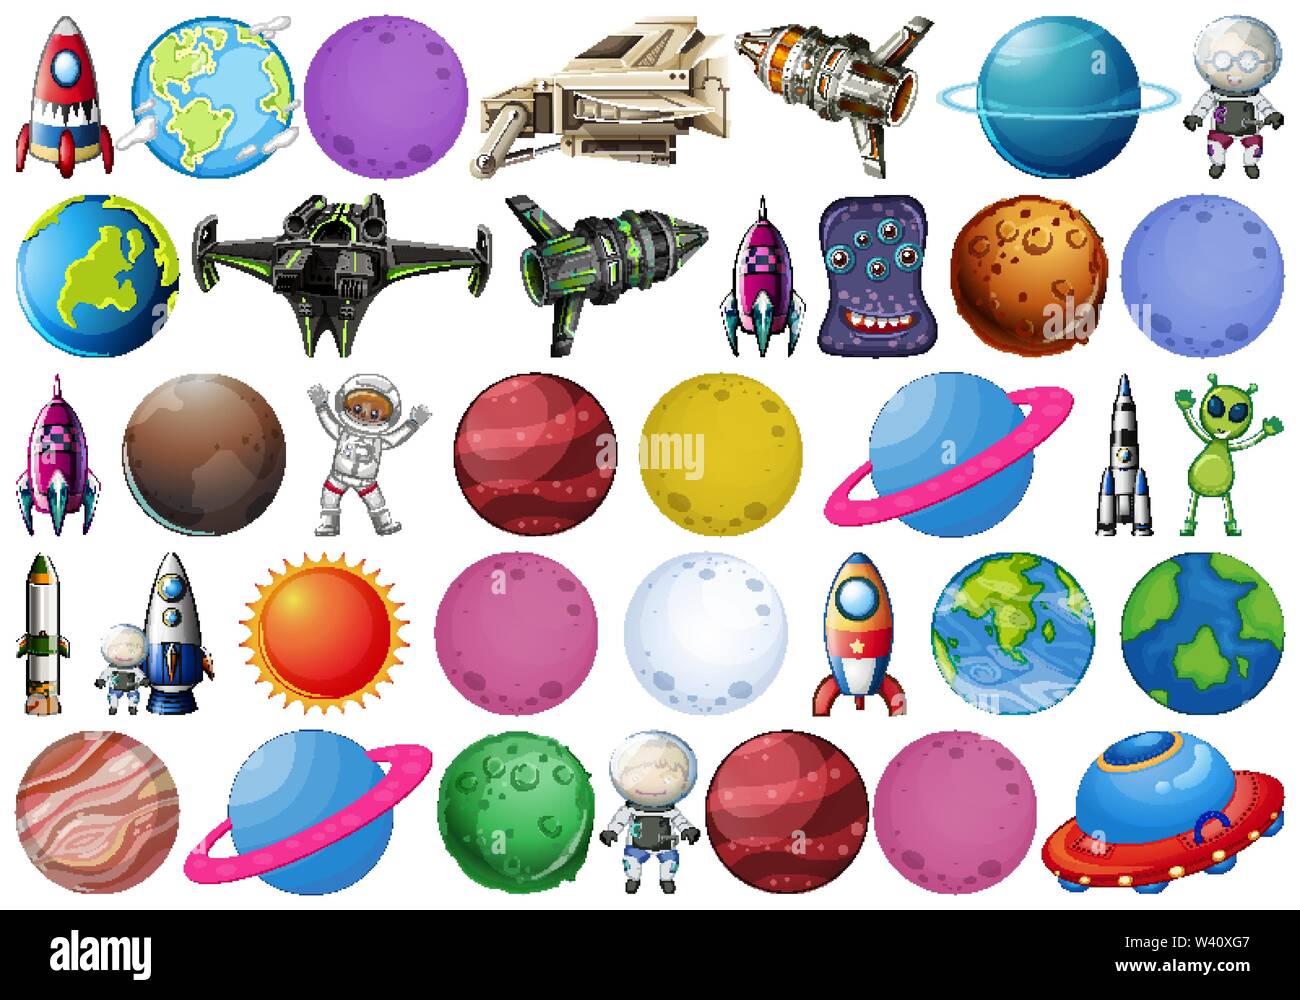 Set of space objects illustration Stock Vector